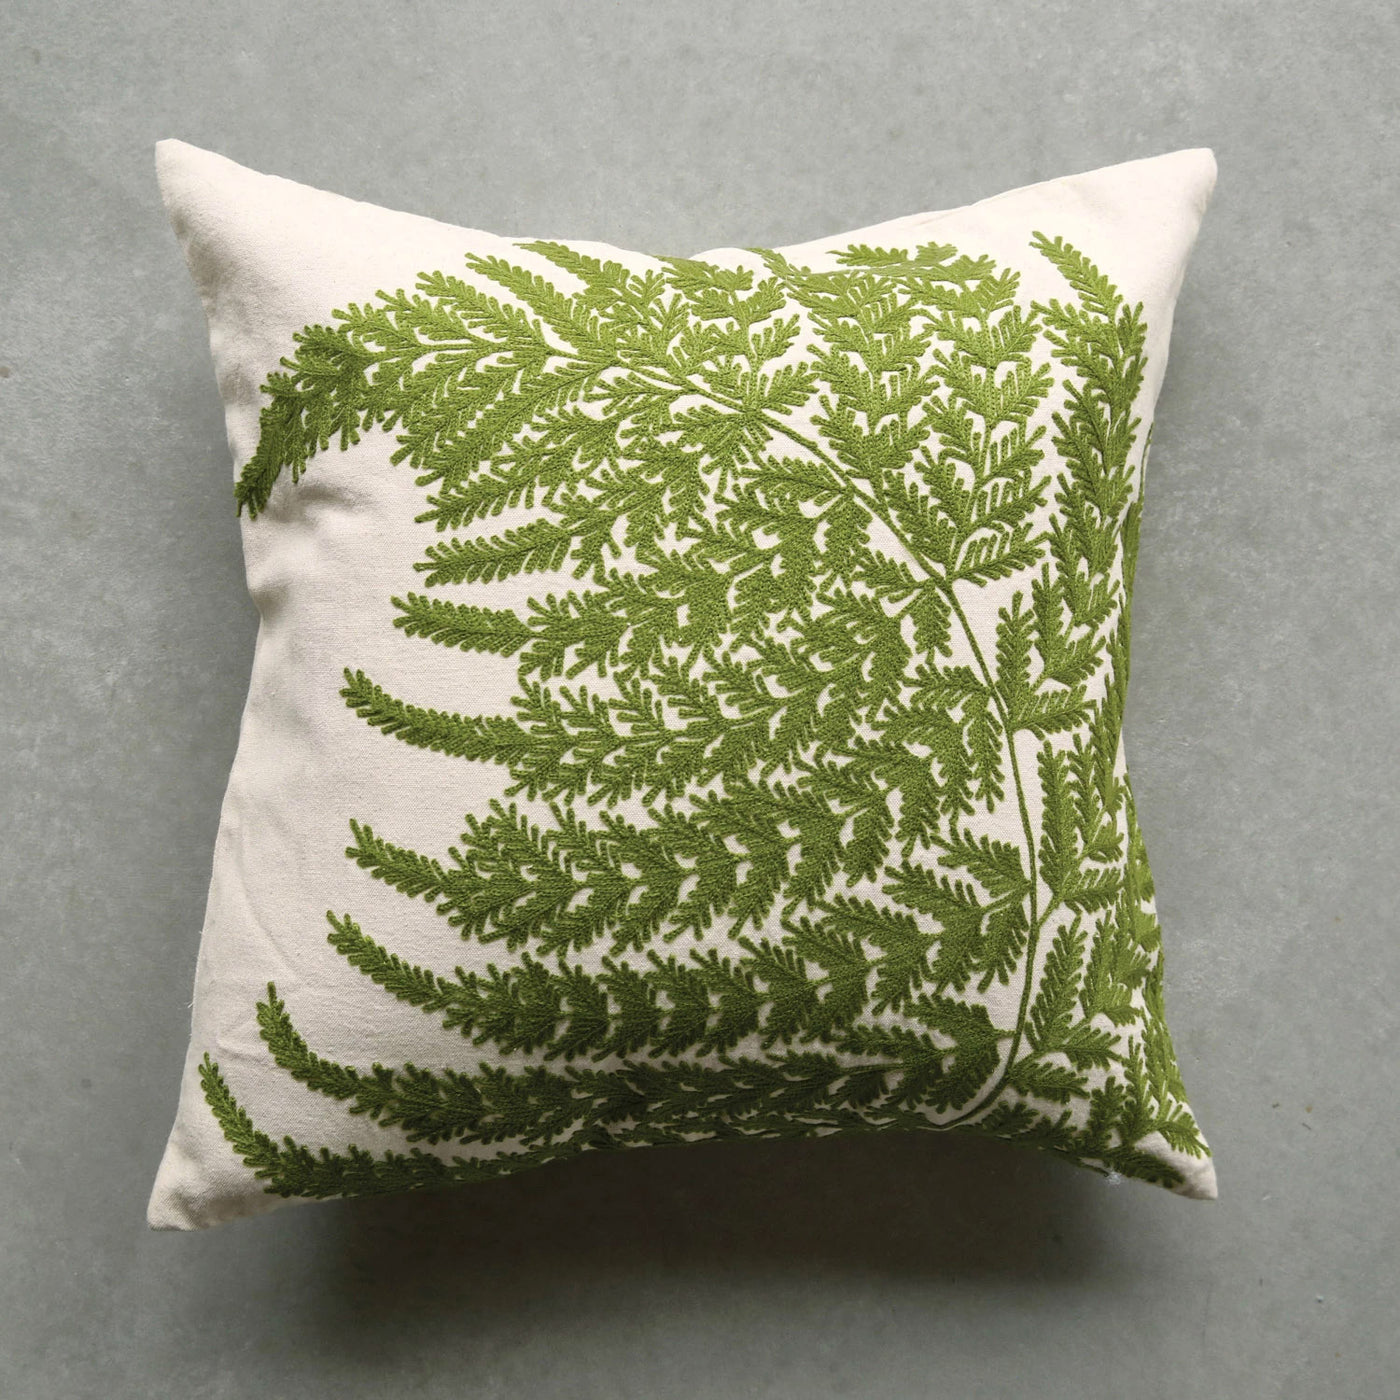 20" Embroidered Fern Fronds Pillow with Down Fill